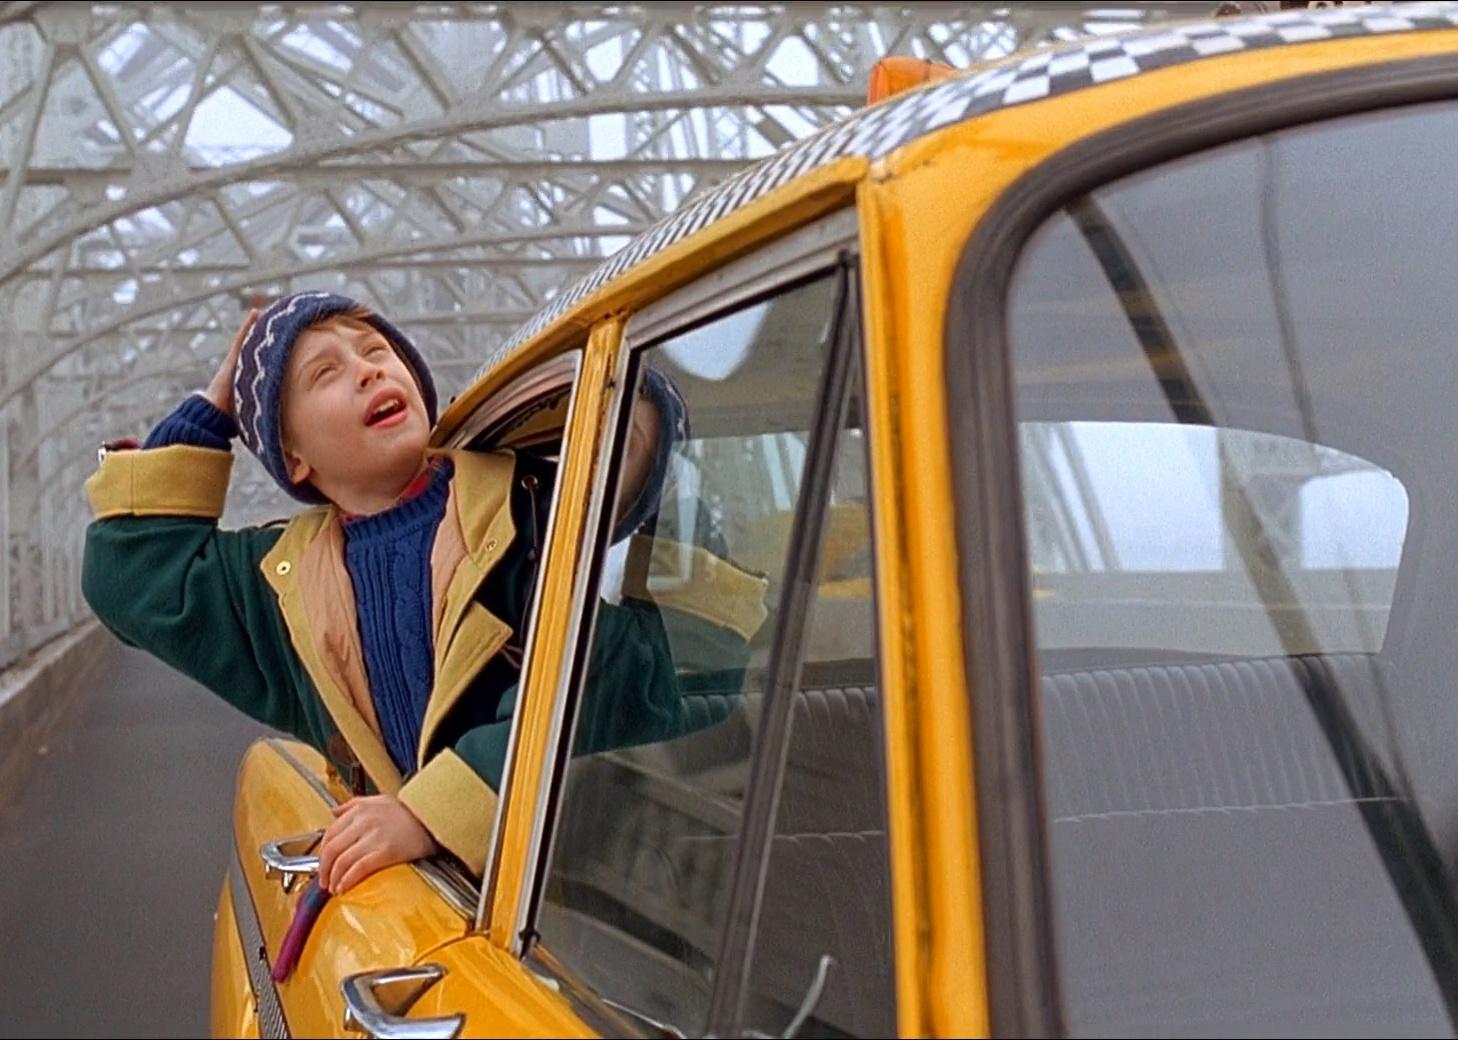 Macaulay Culkin hanging his head out of a yellow cab while it speeds over a bridge.